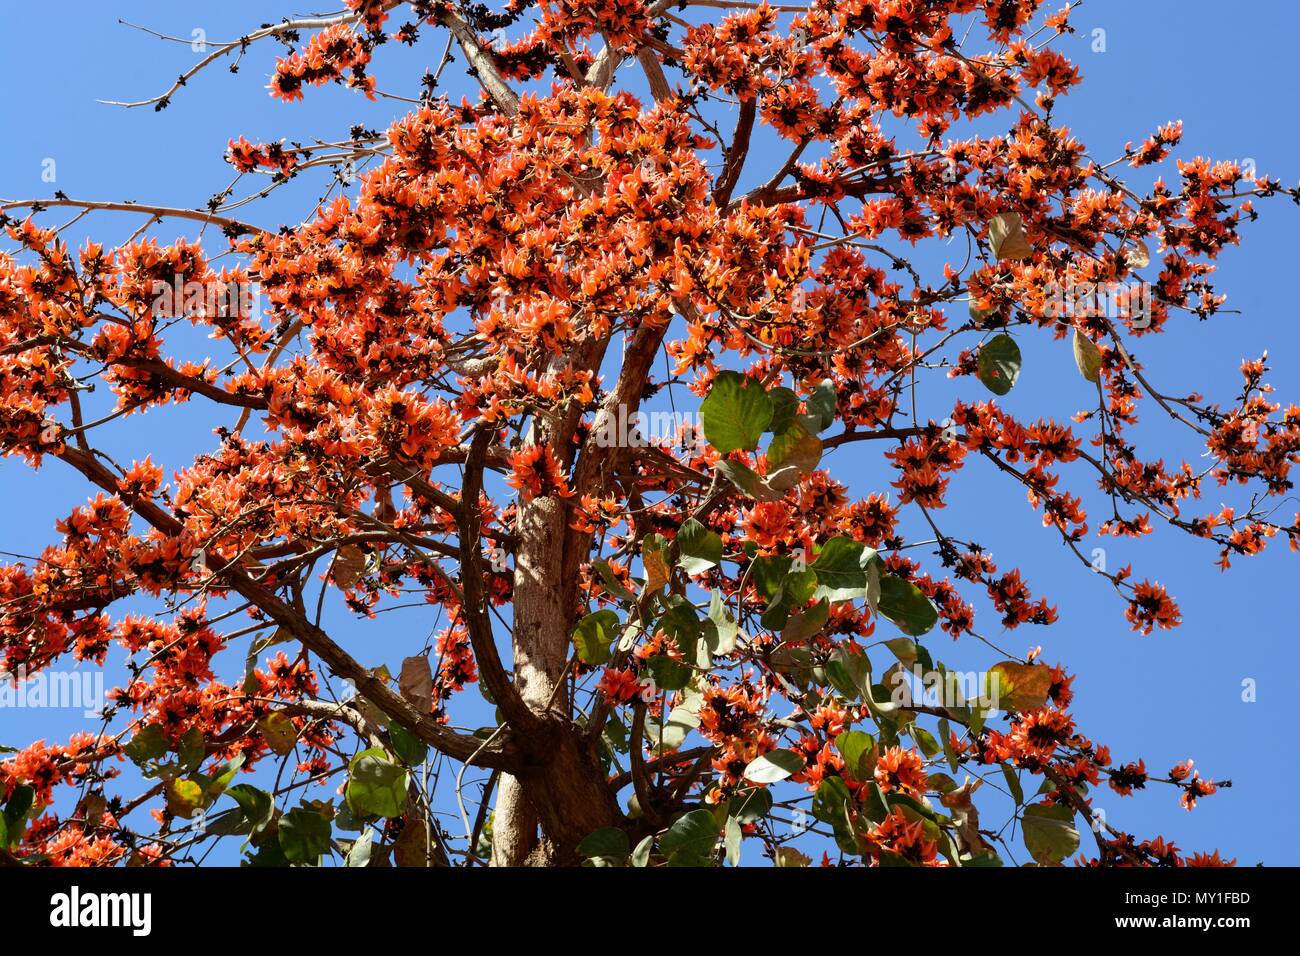 Indian Flame tree Delonix regia Gulmohar tree flowers  against a bright blue sky Rajasthan India Stock Photo